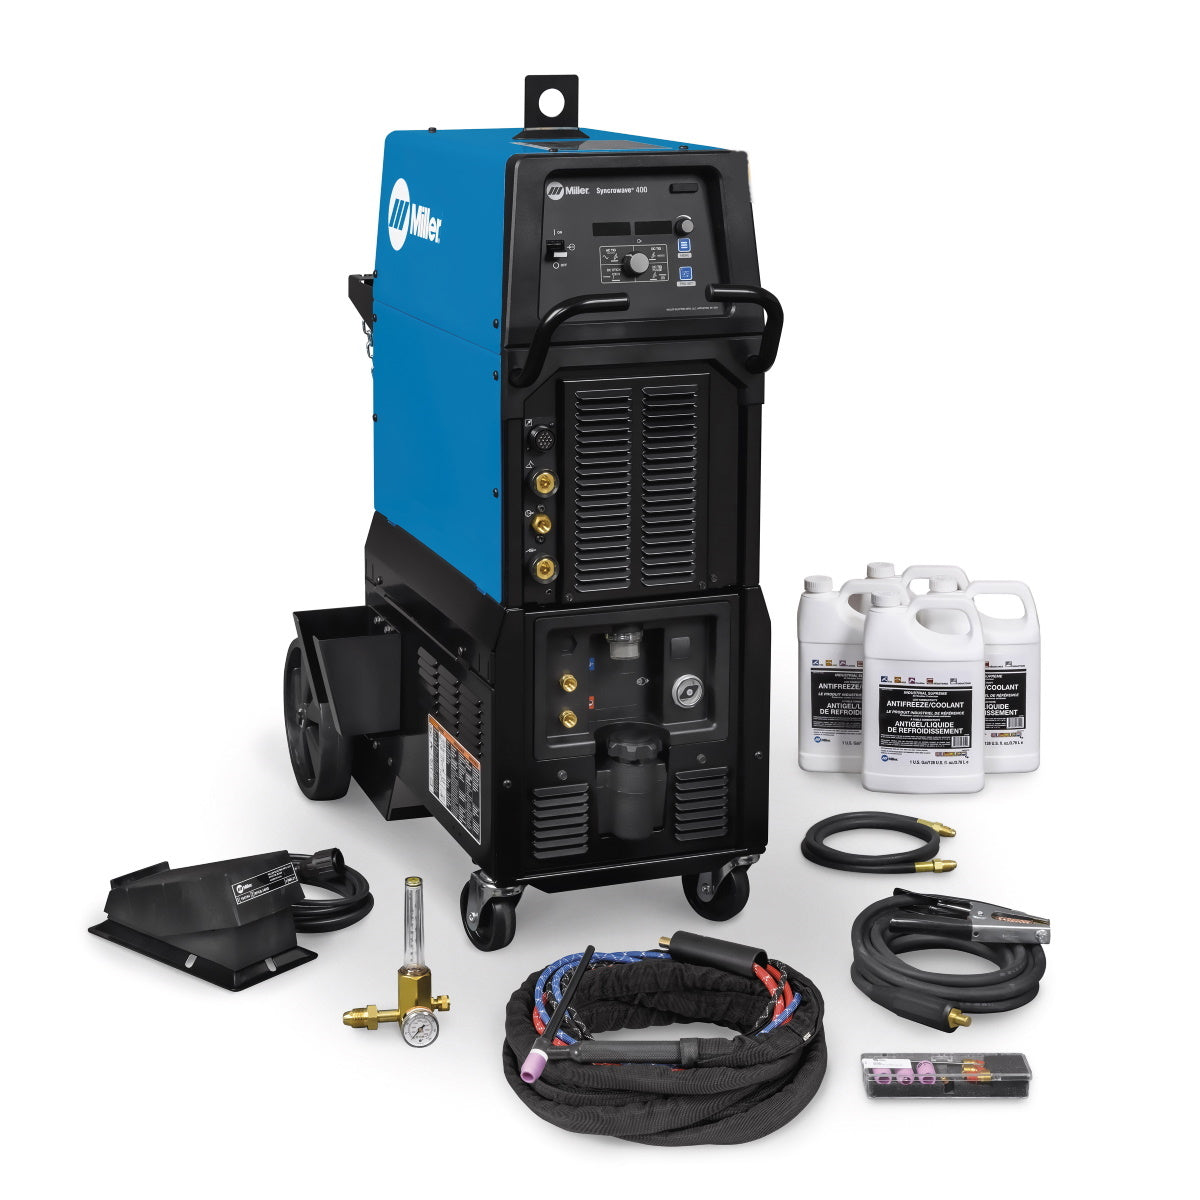 Miller Syncrowave 400 AC/DC TIG and Stick Welder Complete w/Wired Foot Control (951000004)